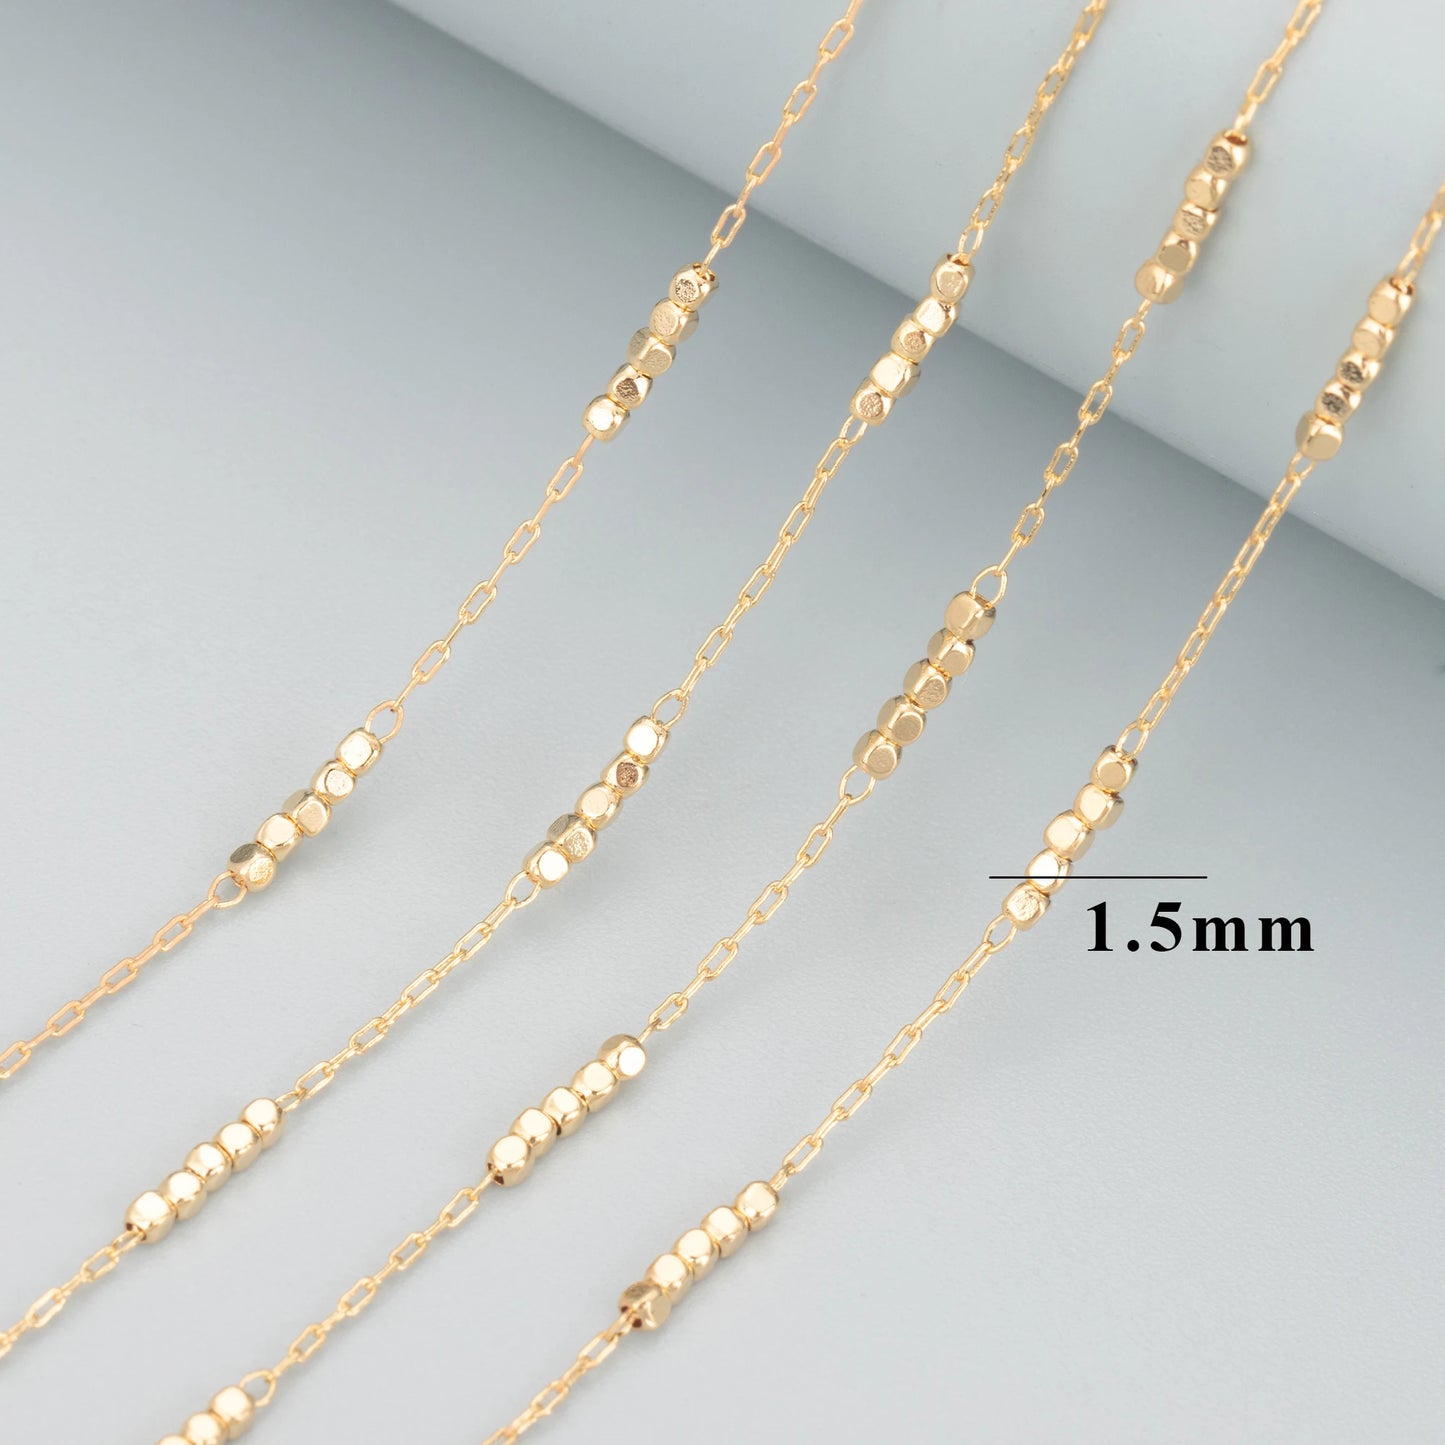 GUFEATHER C79,jewelry accessories,18k gold plated,copper,pearl,pass REACH,nickel free,diy chain necklace,jewelry making,1m/lot